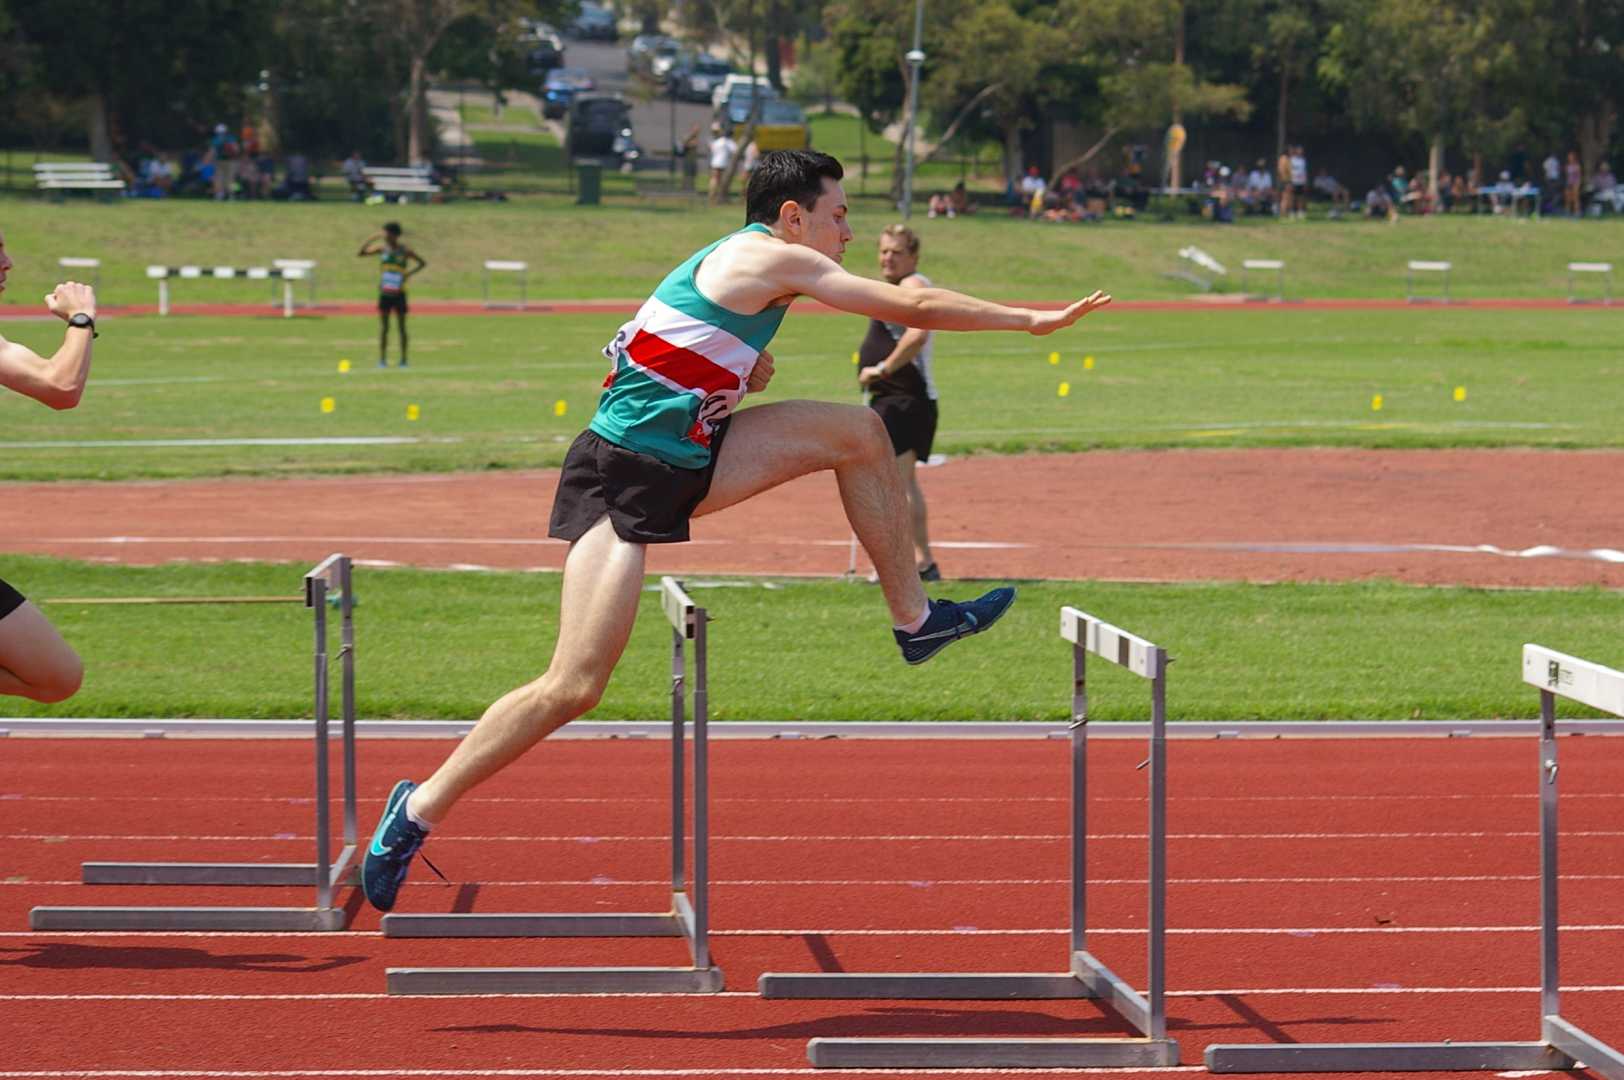 Harry leaping over a 400m hurdle